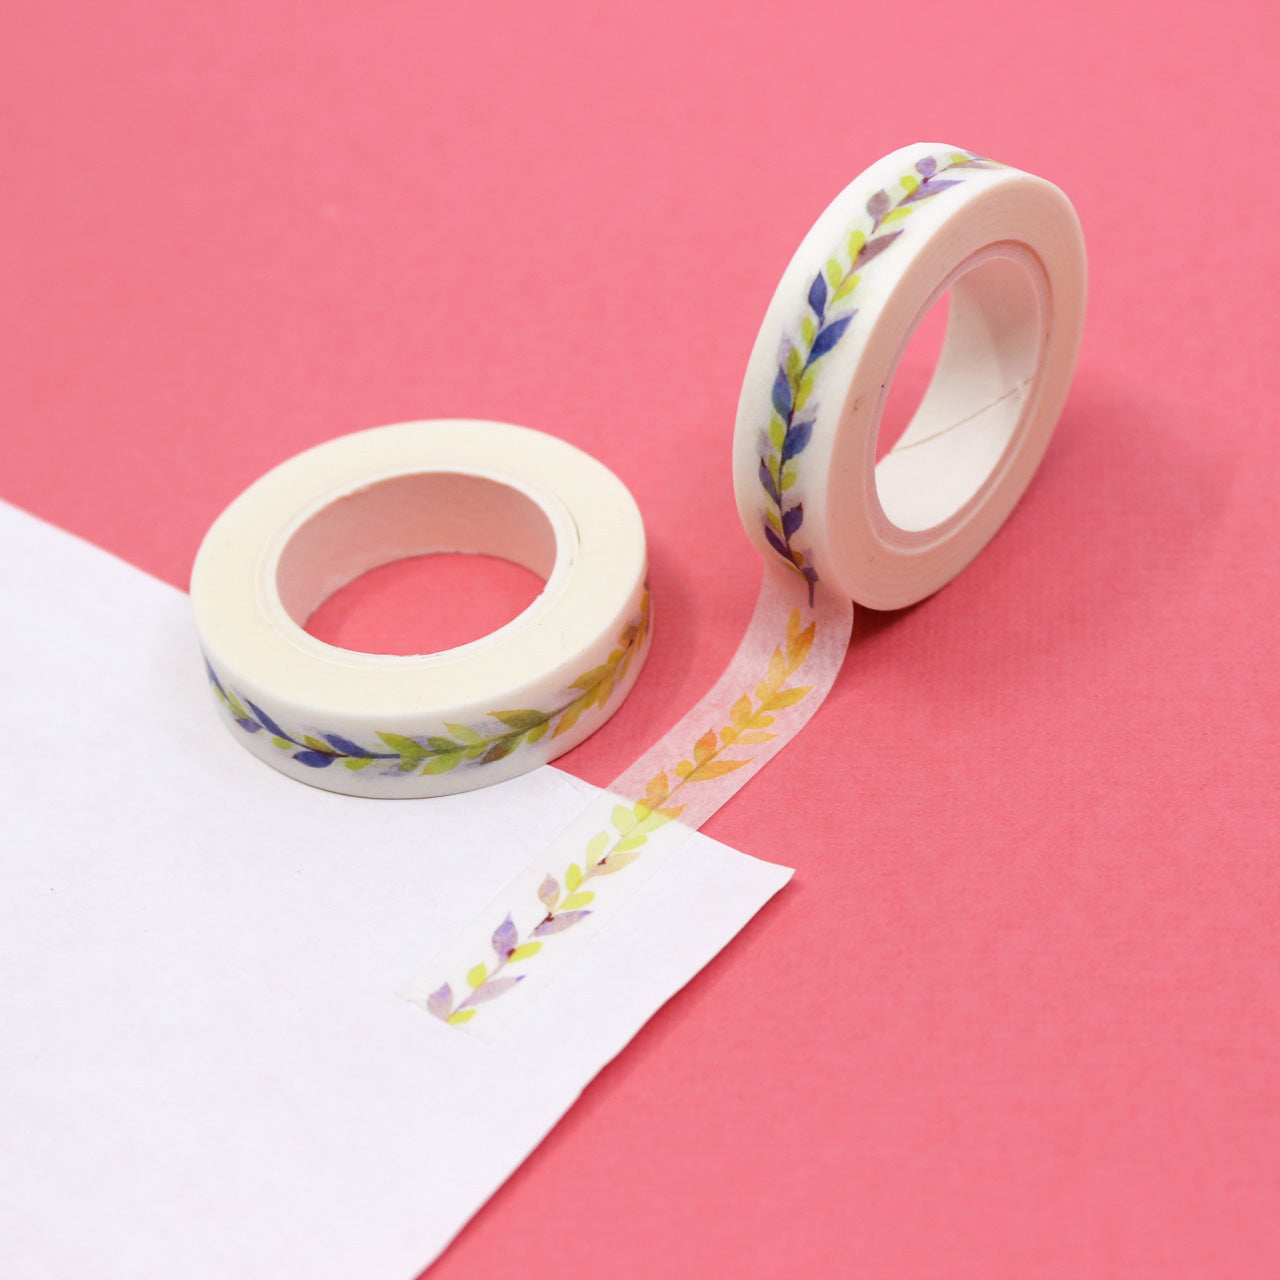 Enhance your projects with our Narrow Purple Vine Washi Tape, featuring intricate vine and leaf designs in a regal purple hue. Ideal for adding an elegant and botanical touch to your crafts. This tape is sold at BBB Supplies Craft Shop.